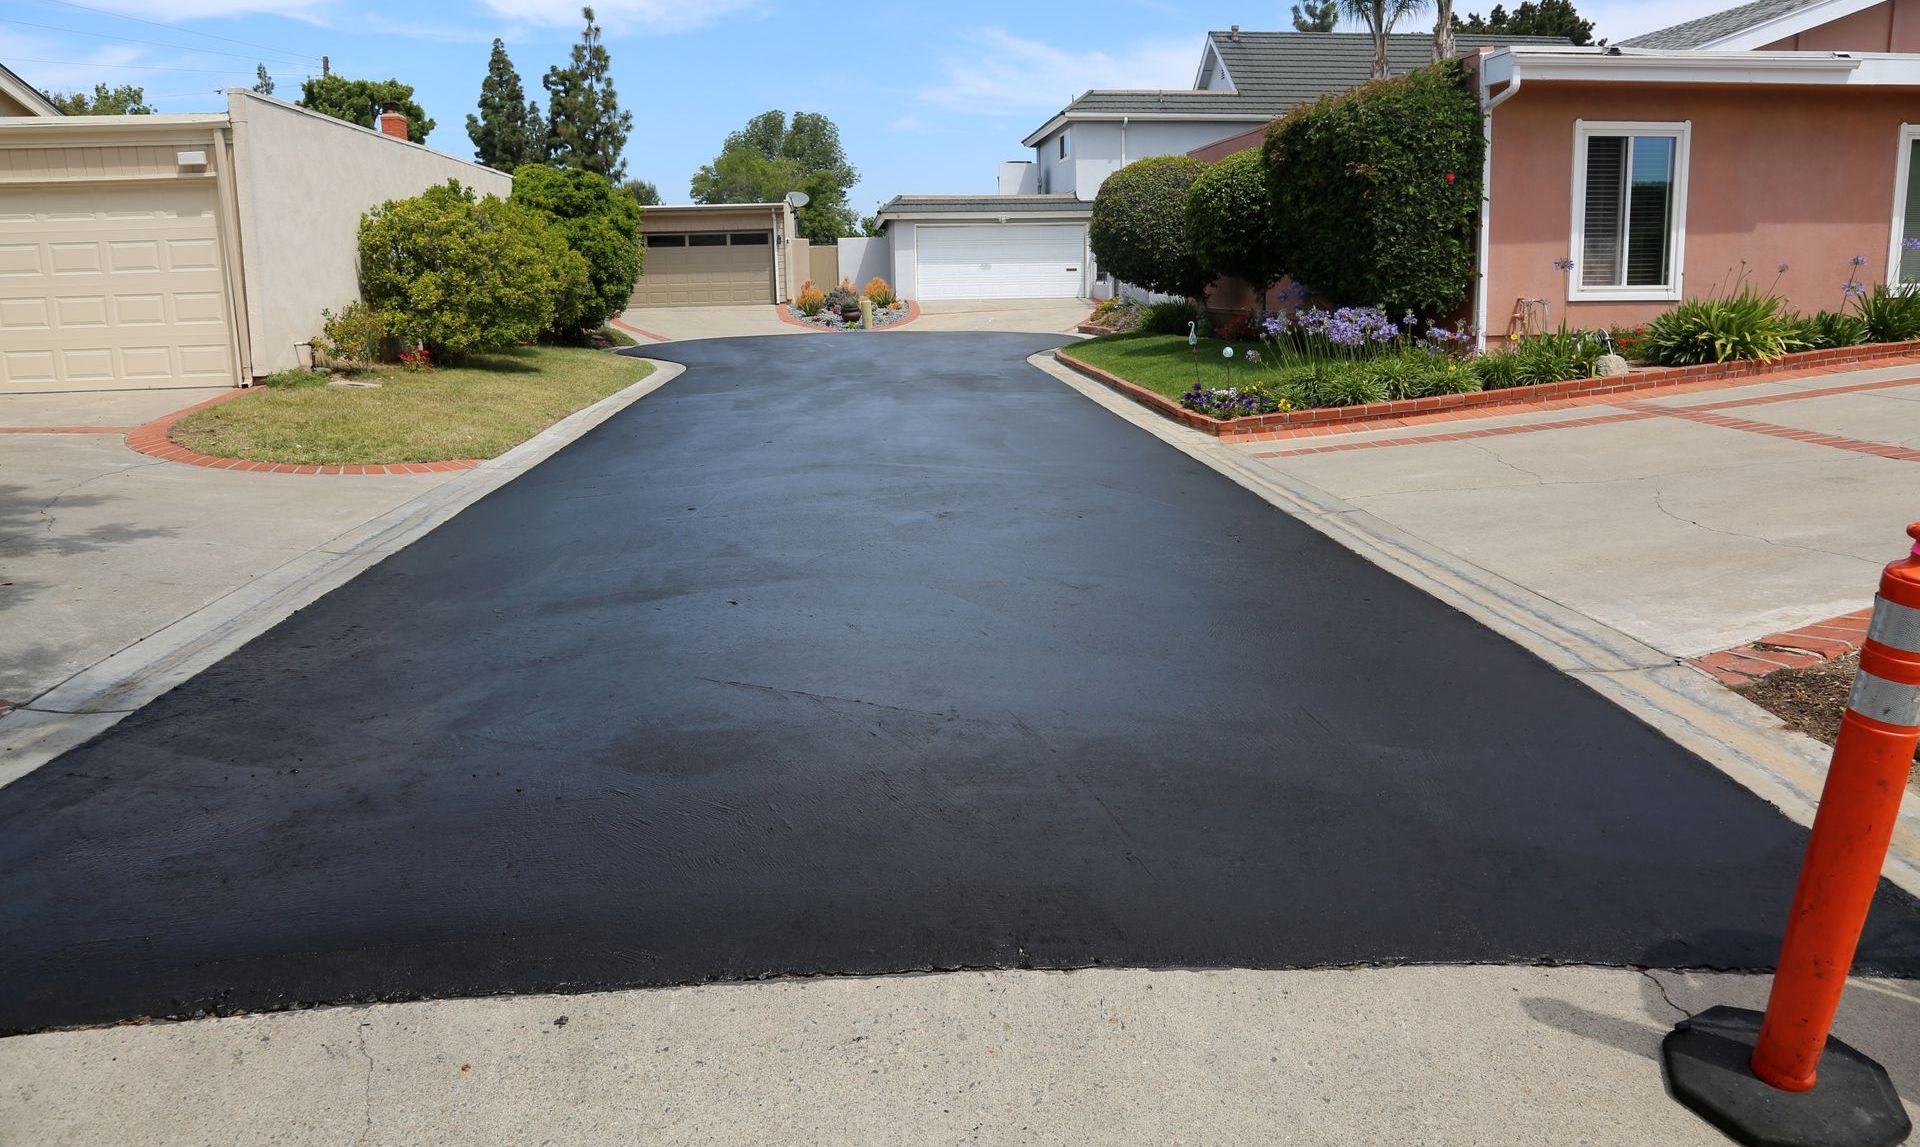 Sealcoating a driveway